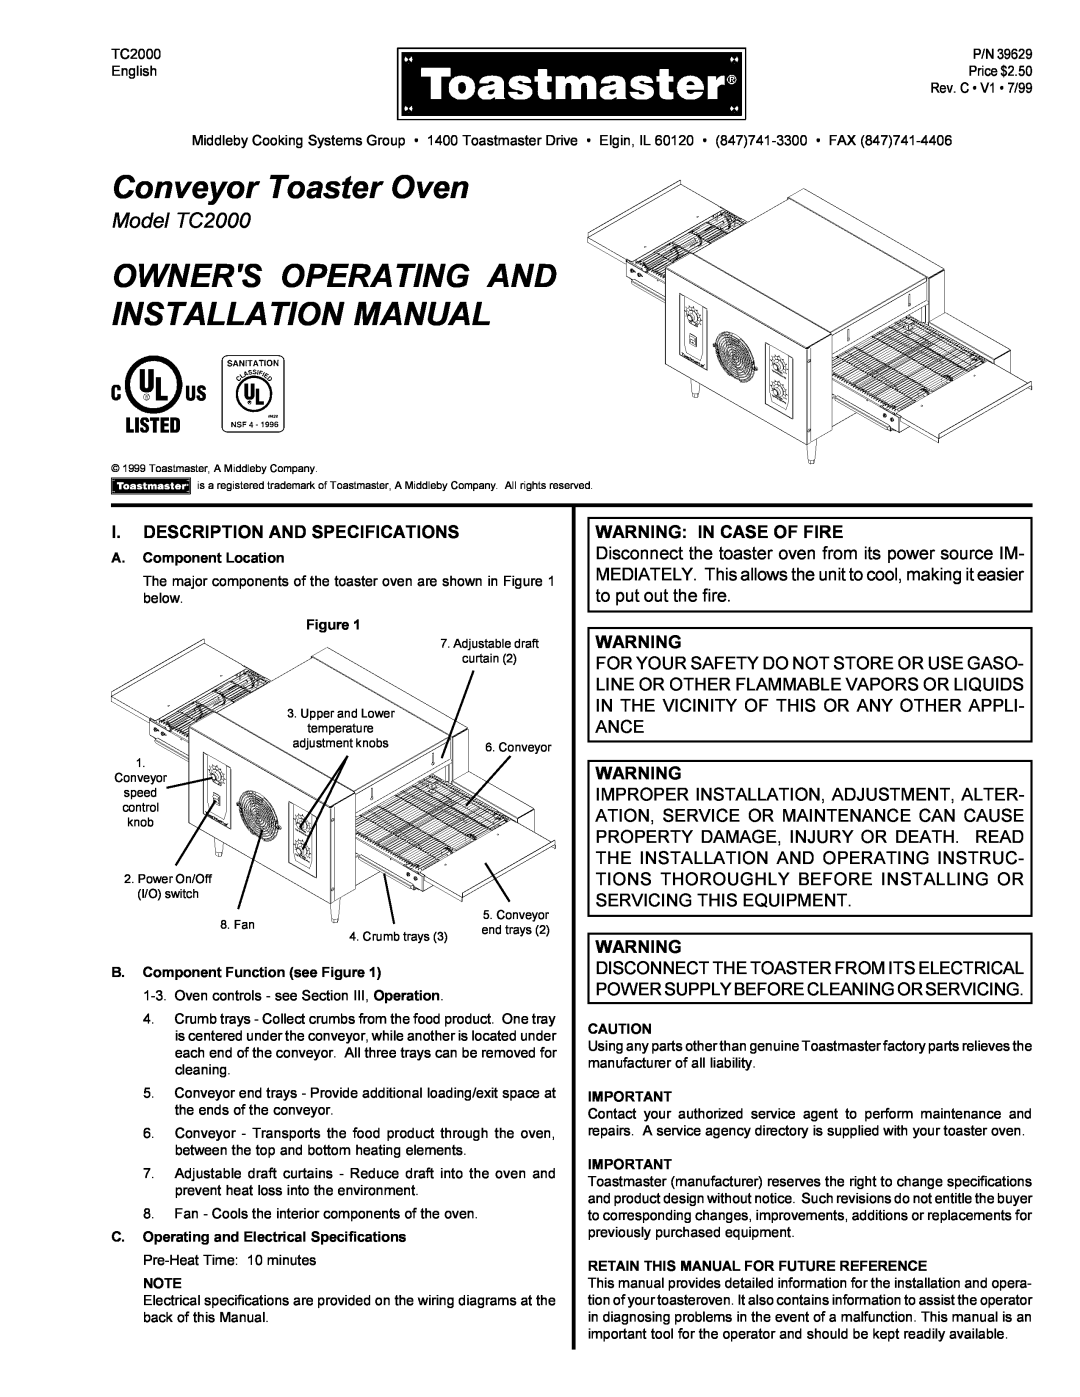 Toastmaster installation manual Conveyor Toaster Oven, Owners Operating And Installation Manual, Model TC2000 